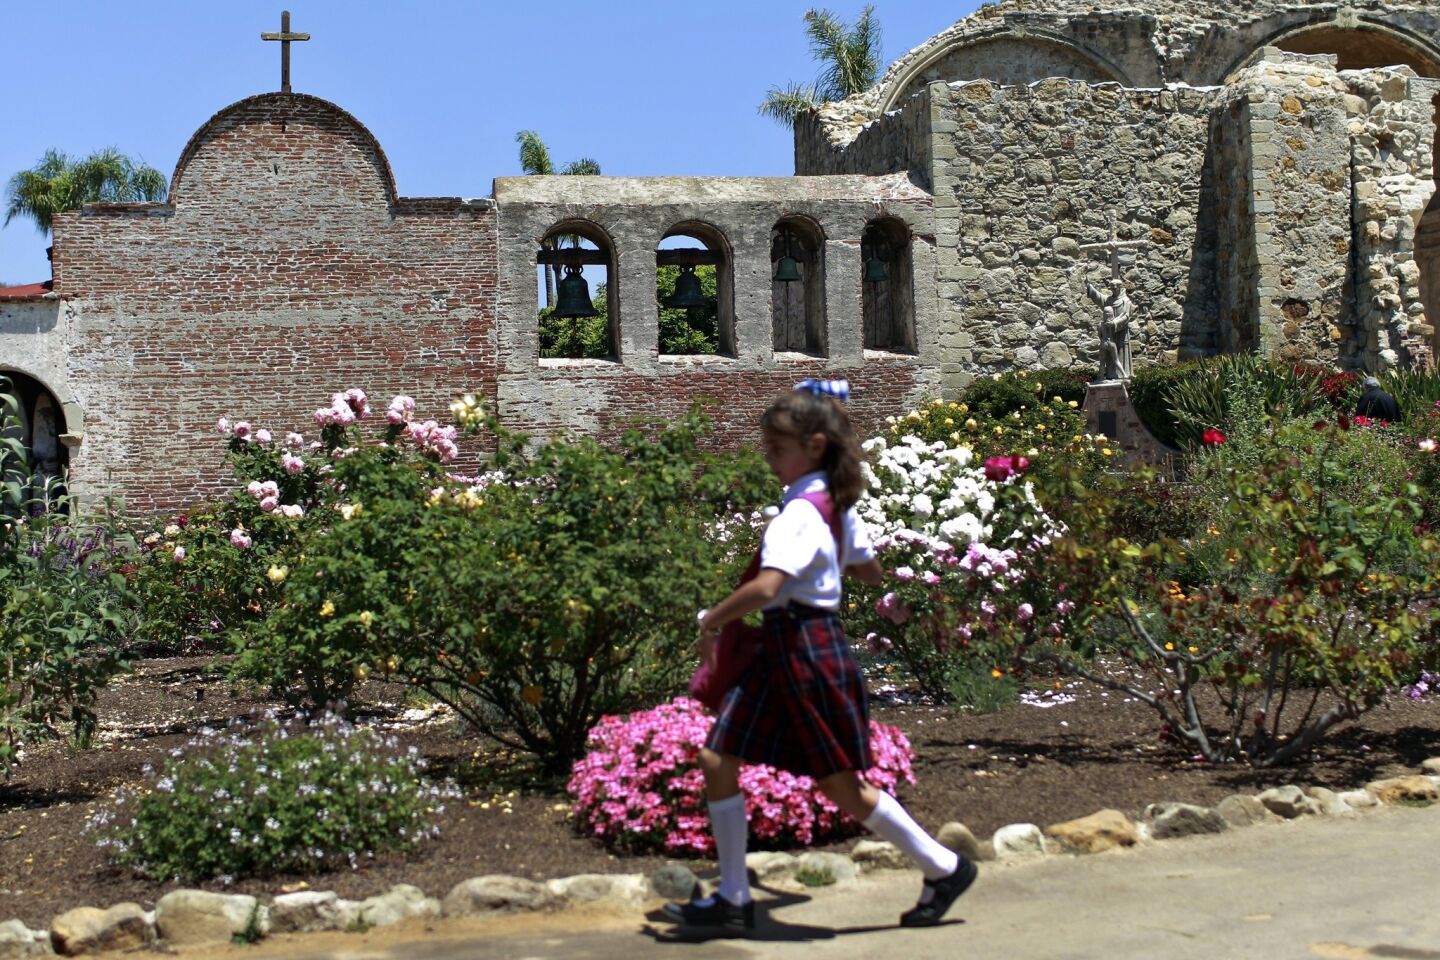 A young girl runs past the blooming gardens inside Mission San Juan Capistrano. The gardens have helped make this mission among the state's most popular.